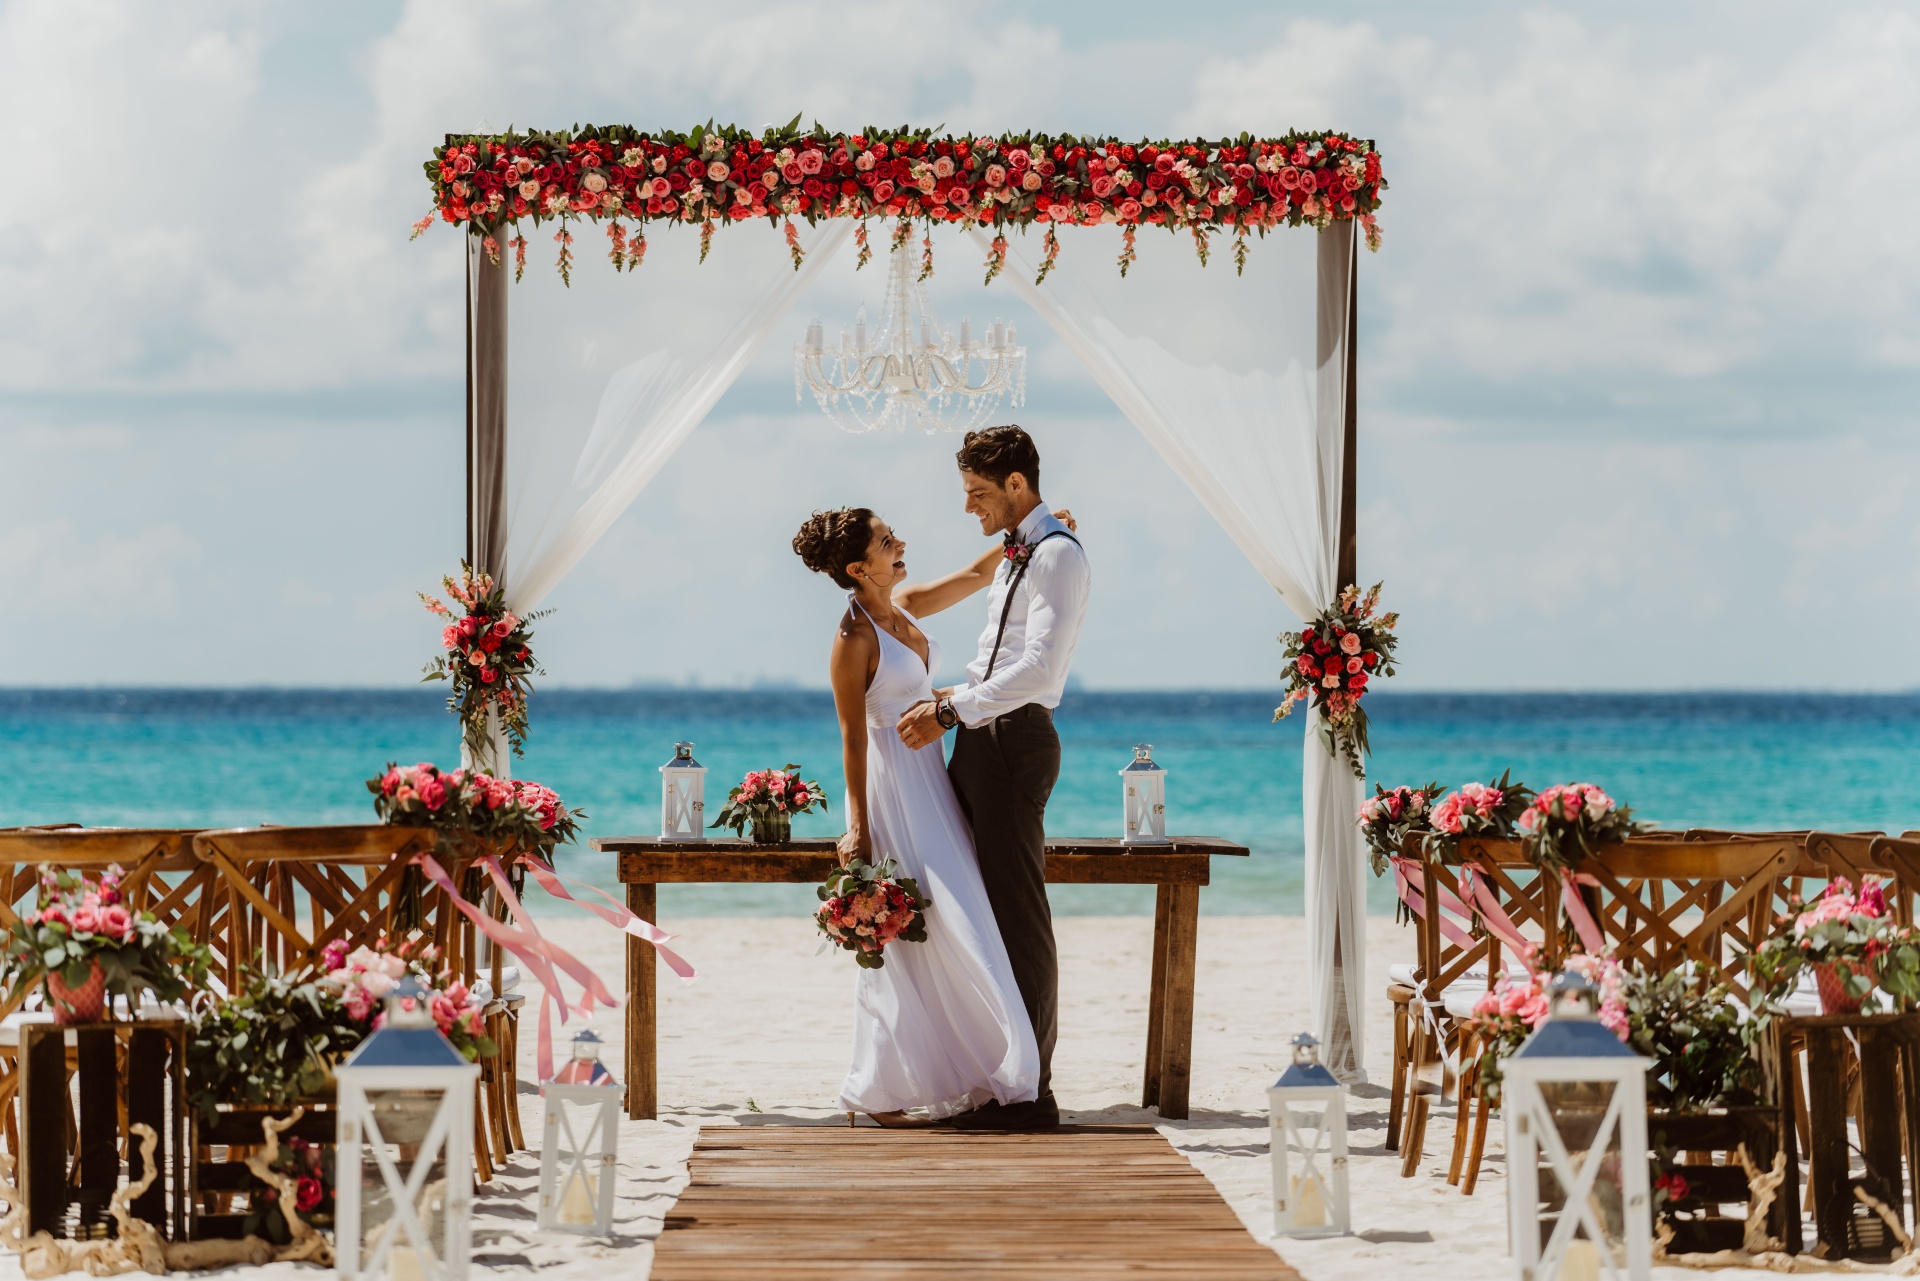 Best Wedding Venues In Brazil Where You Can Tie The Knot